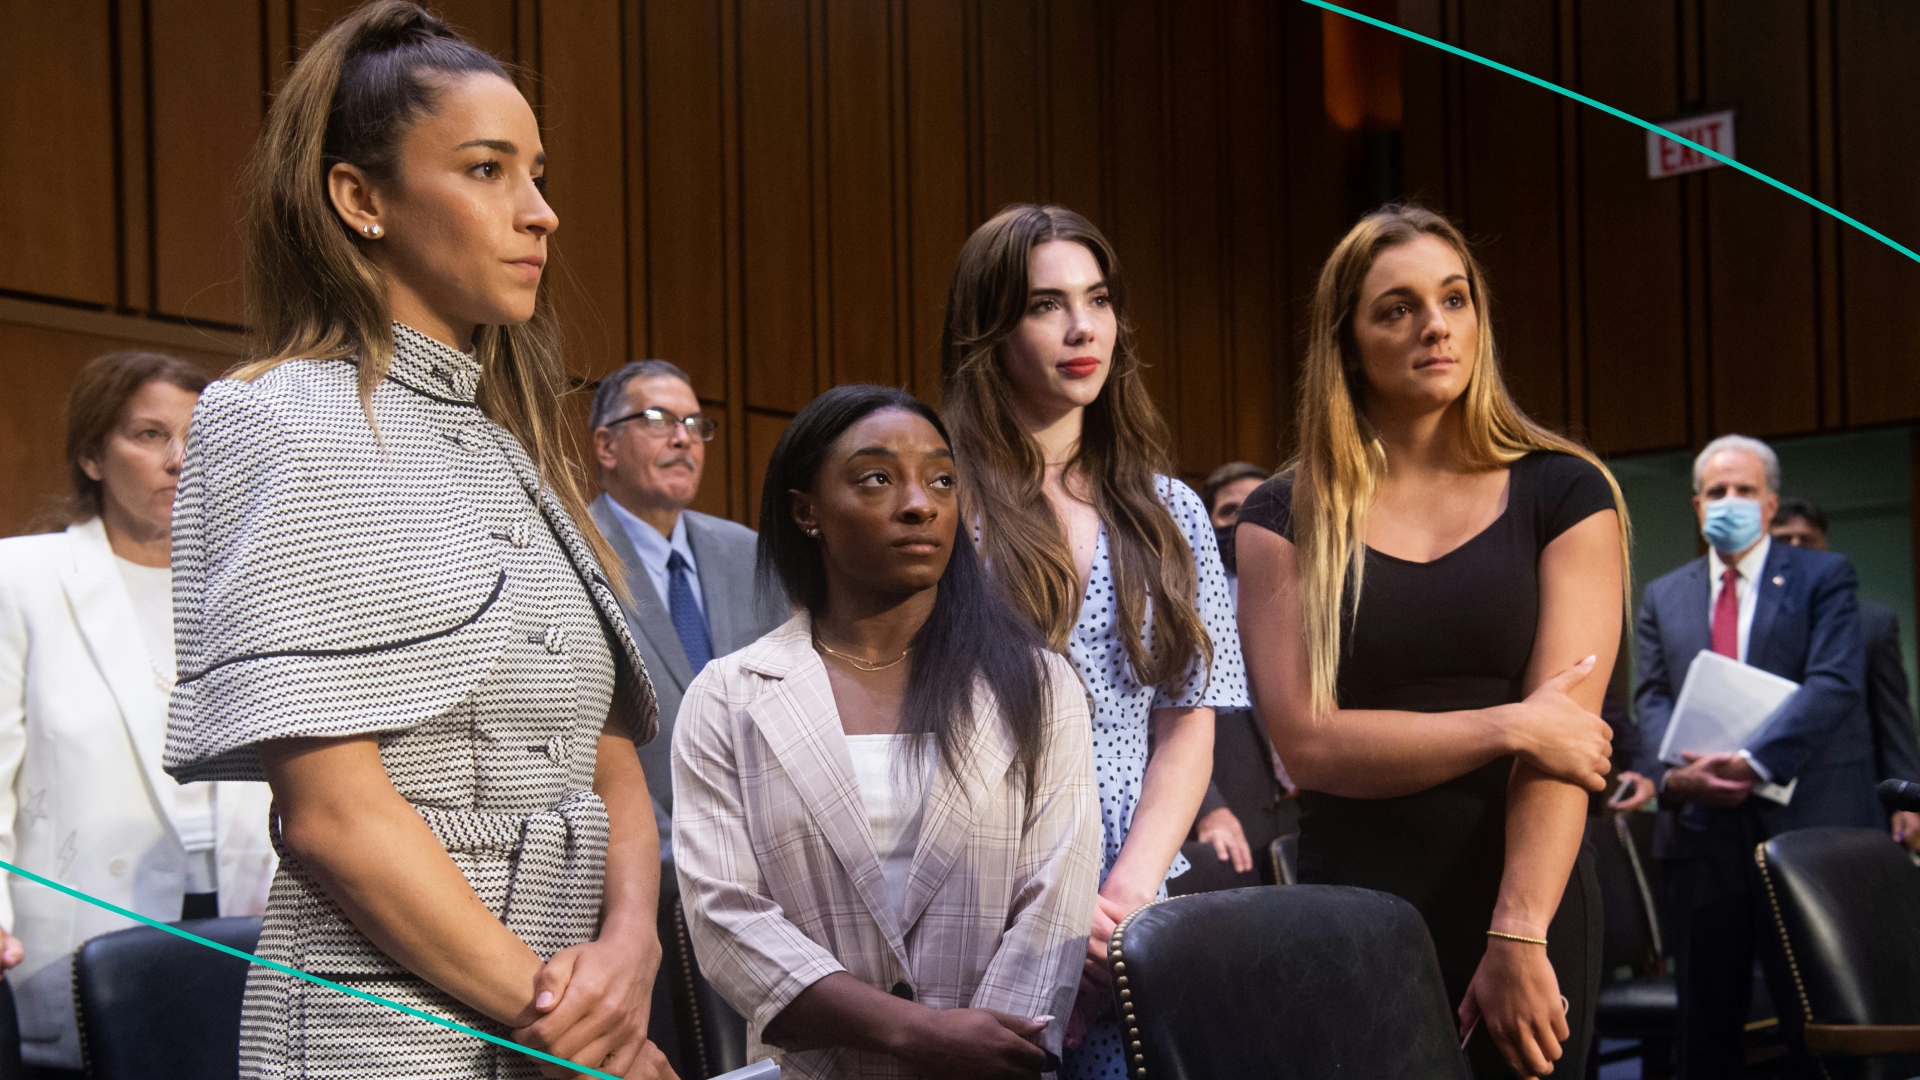 U.S. Olympic gymnasts Aly Raisman, Simone Biles, McKayla Maroney and NCAA and world champion gymnast Maggie Nichols leave after testifying during a Senate Judiciary hearing on Capitol Hill, September 15, 2021 in Washington, DC.